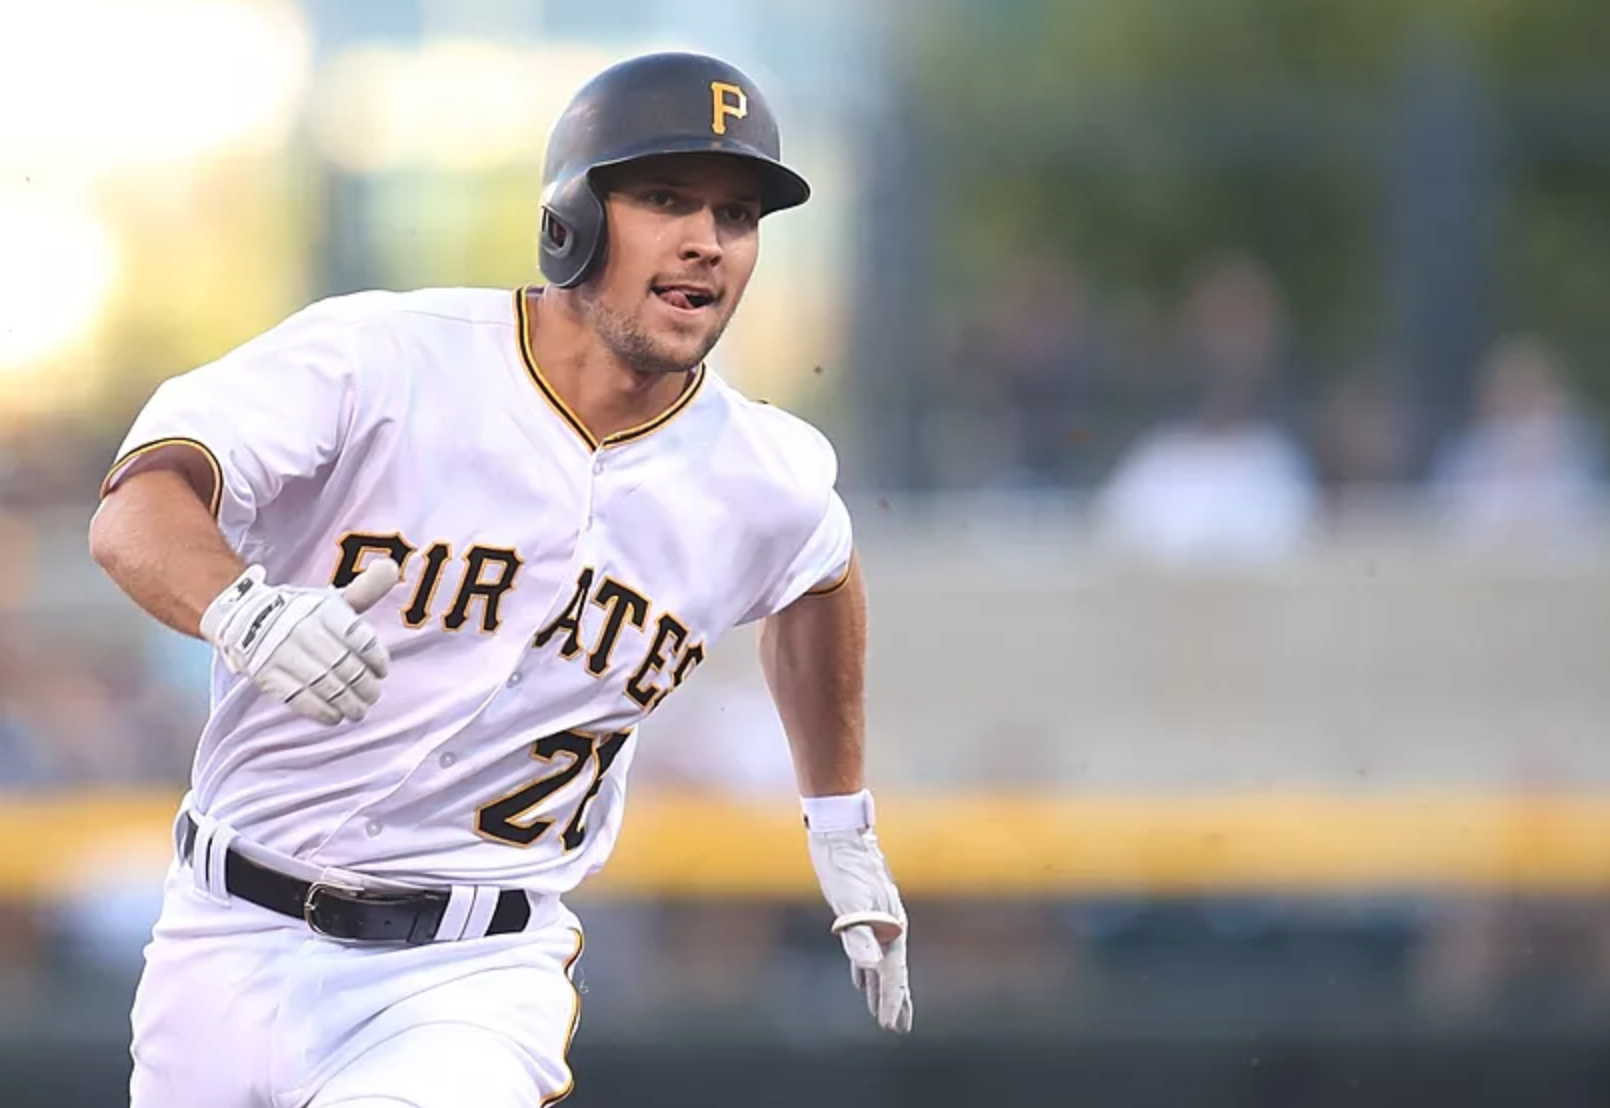 What Should the Pirates Do With Adam Frazier This Offseason